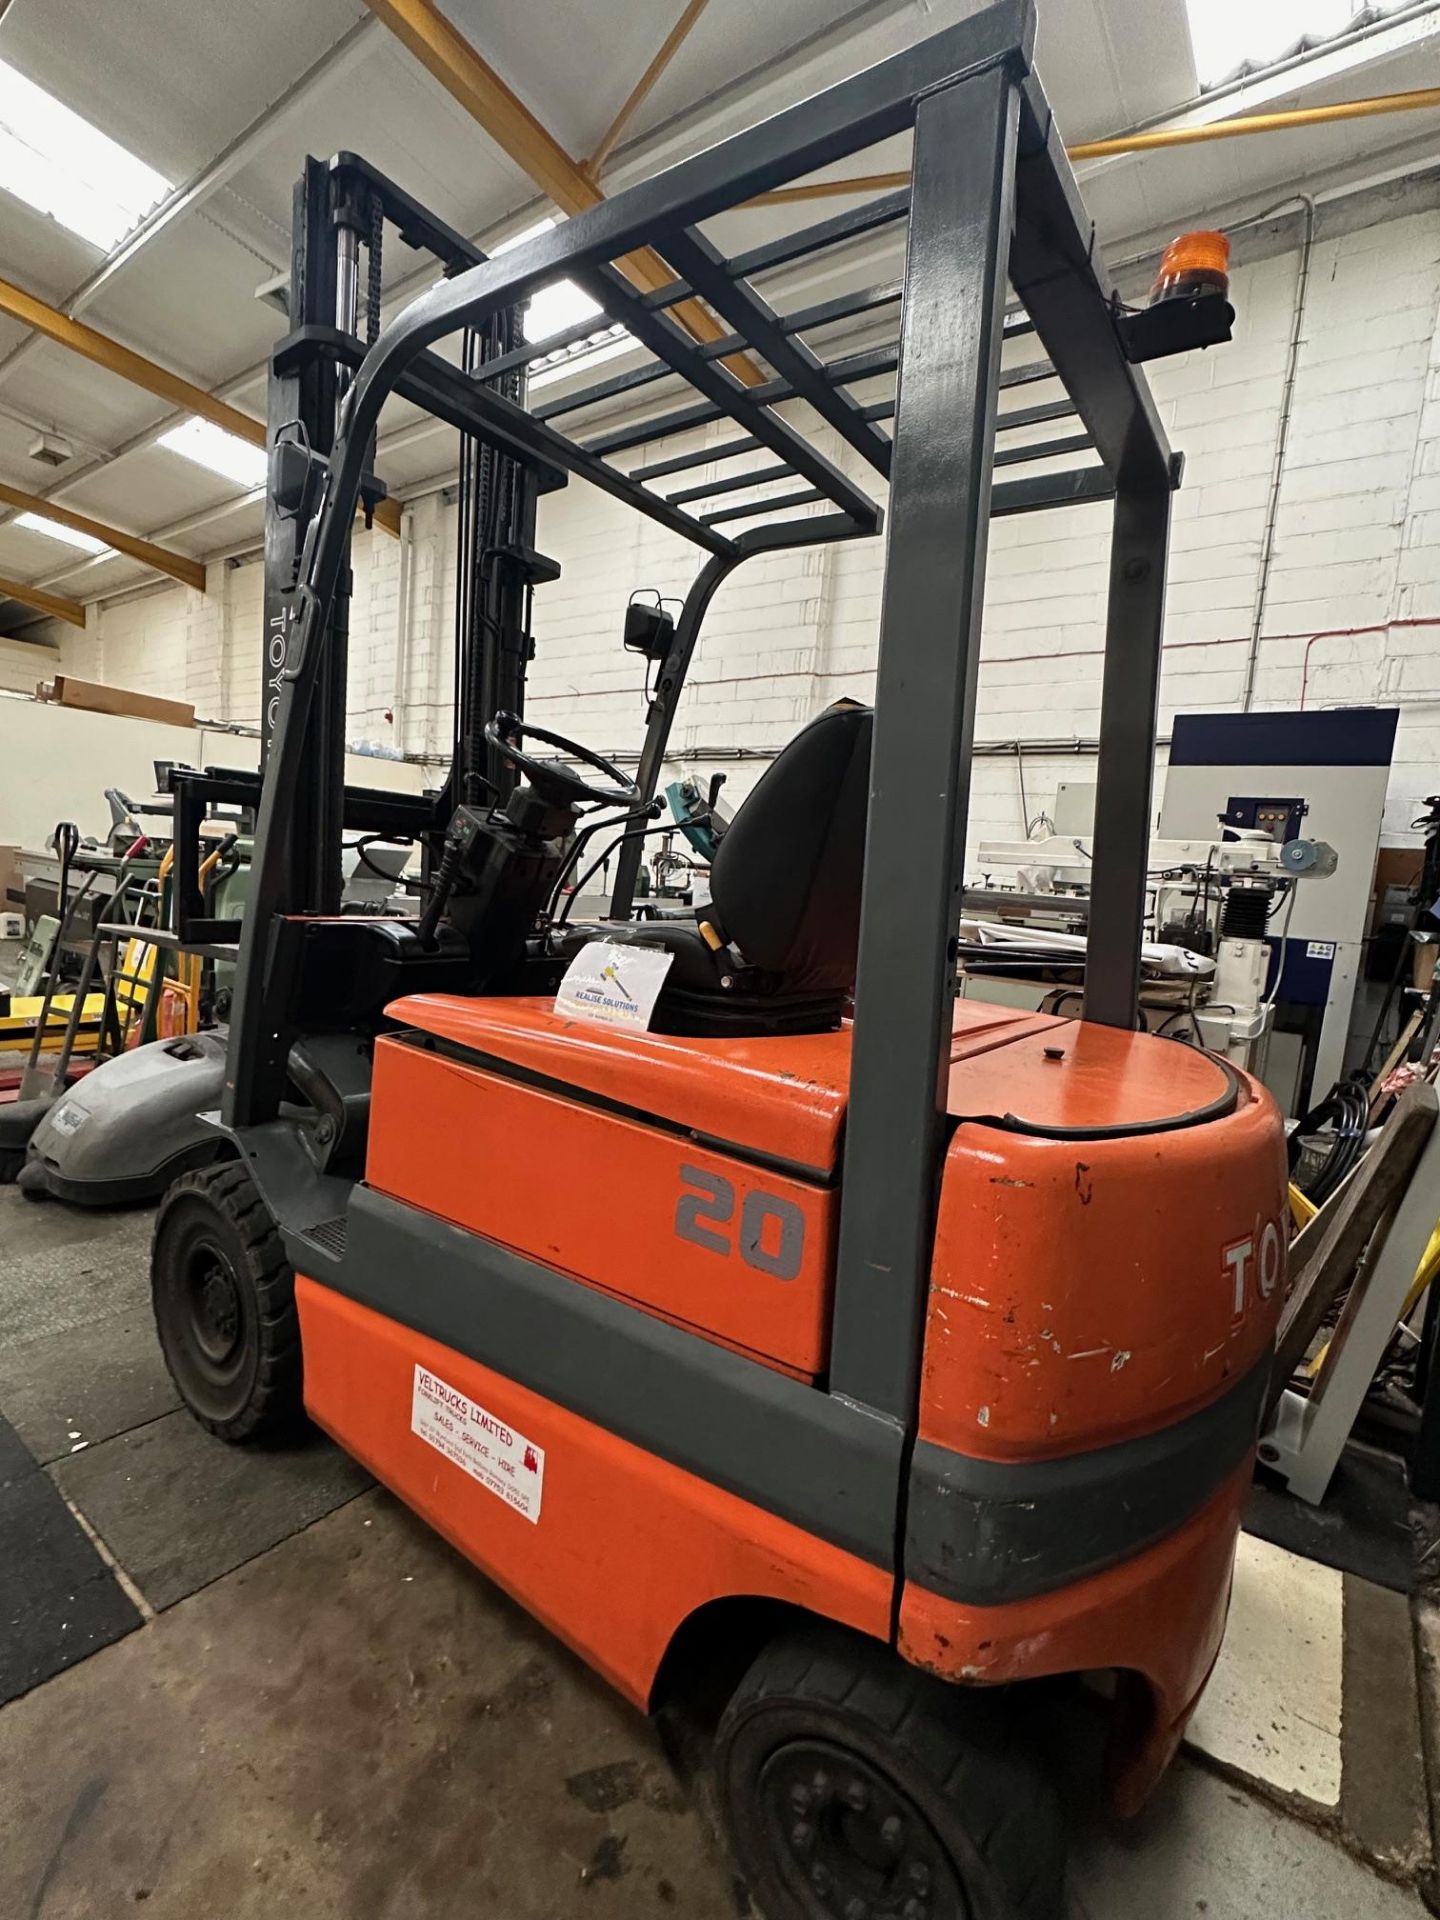 Toyota forklift truck - Image 3 of 6